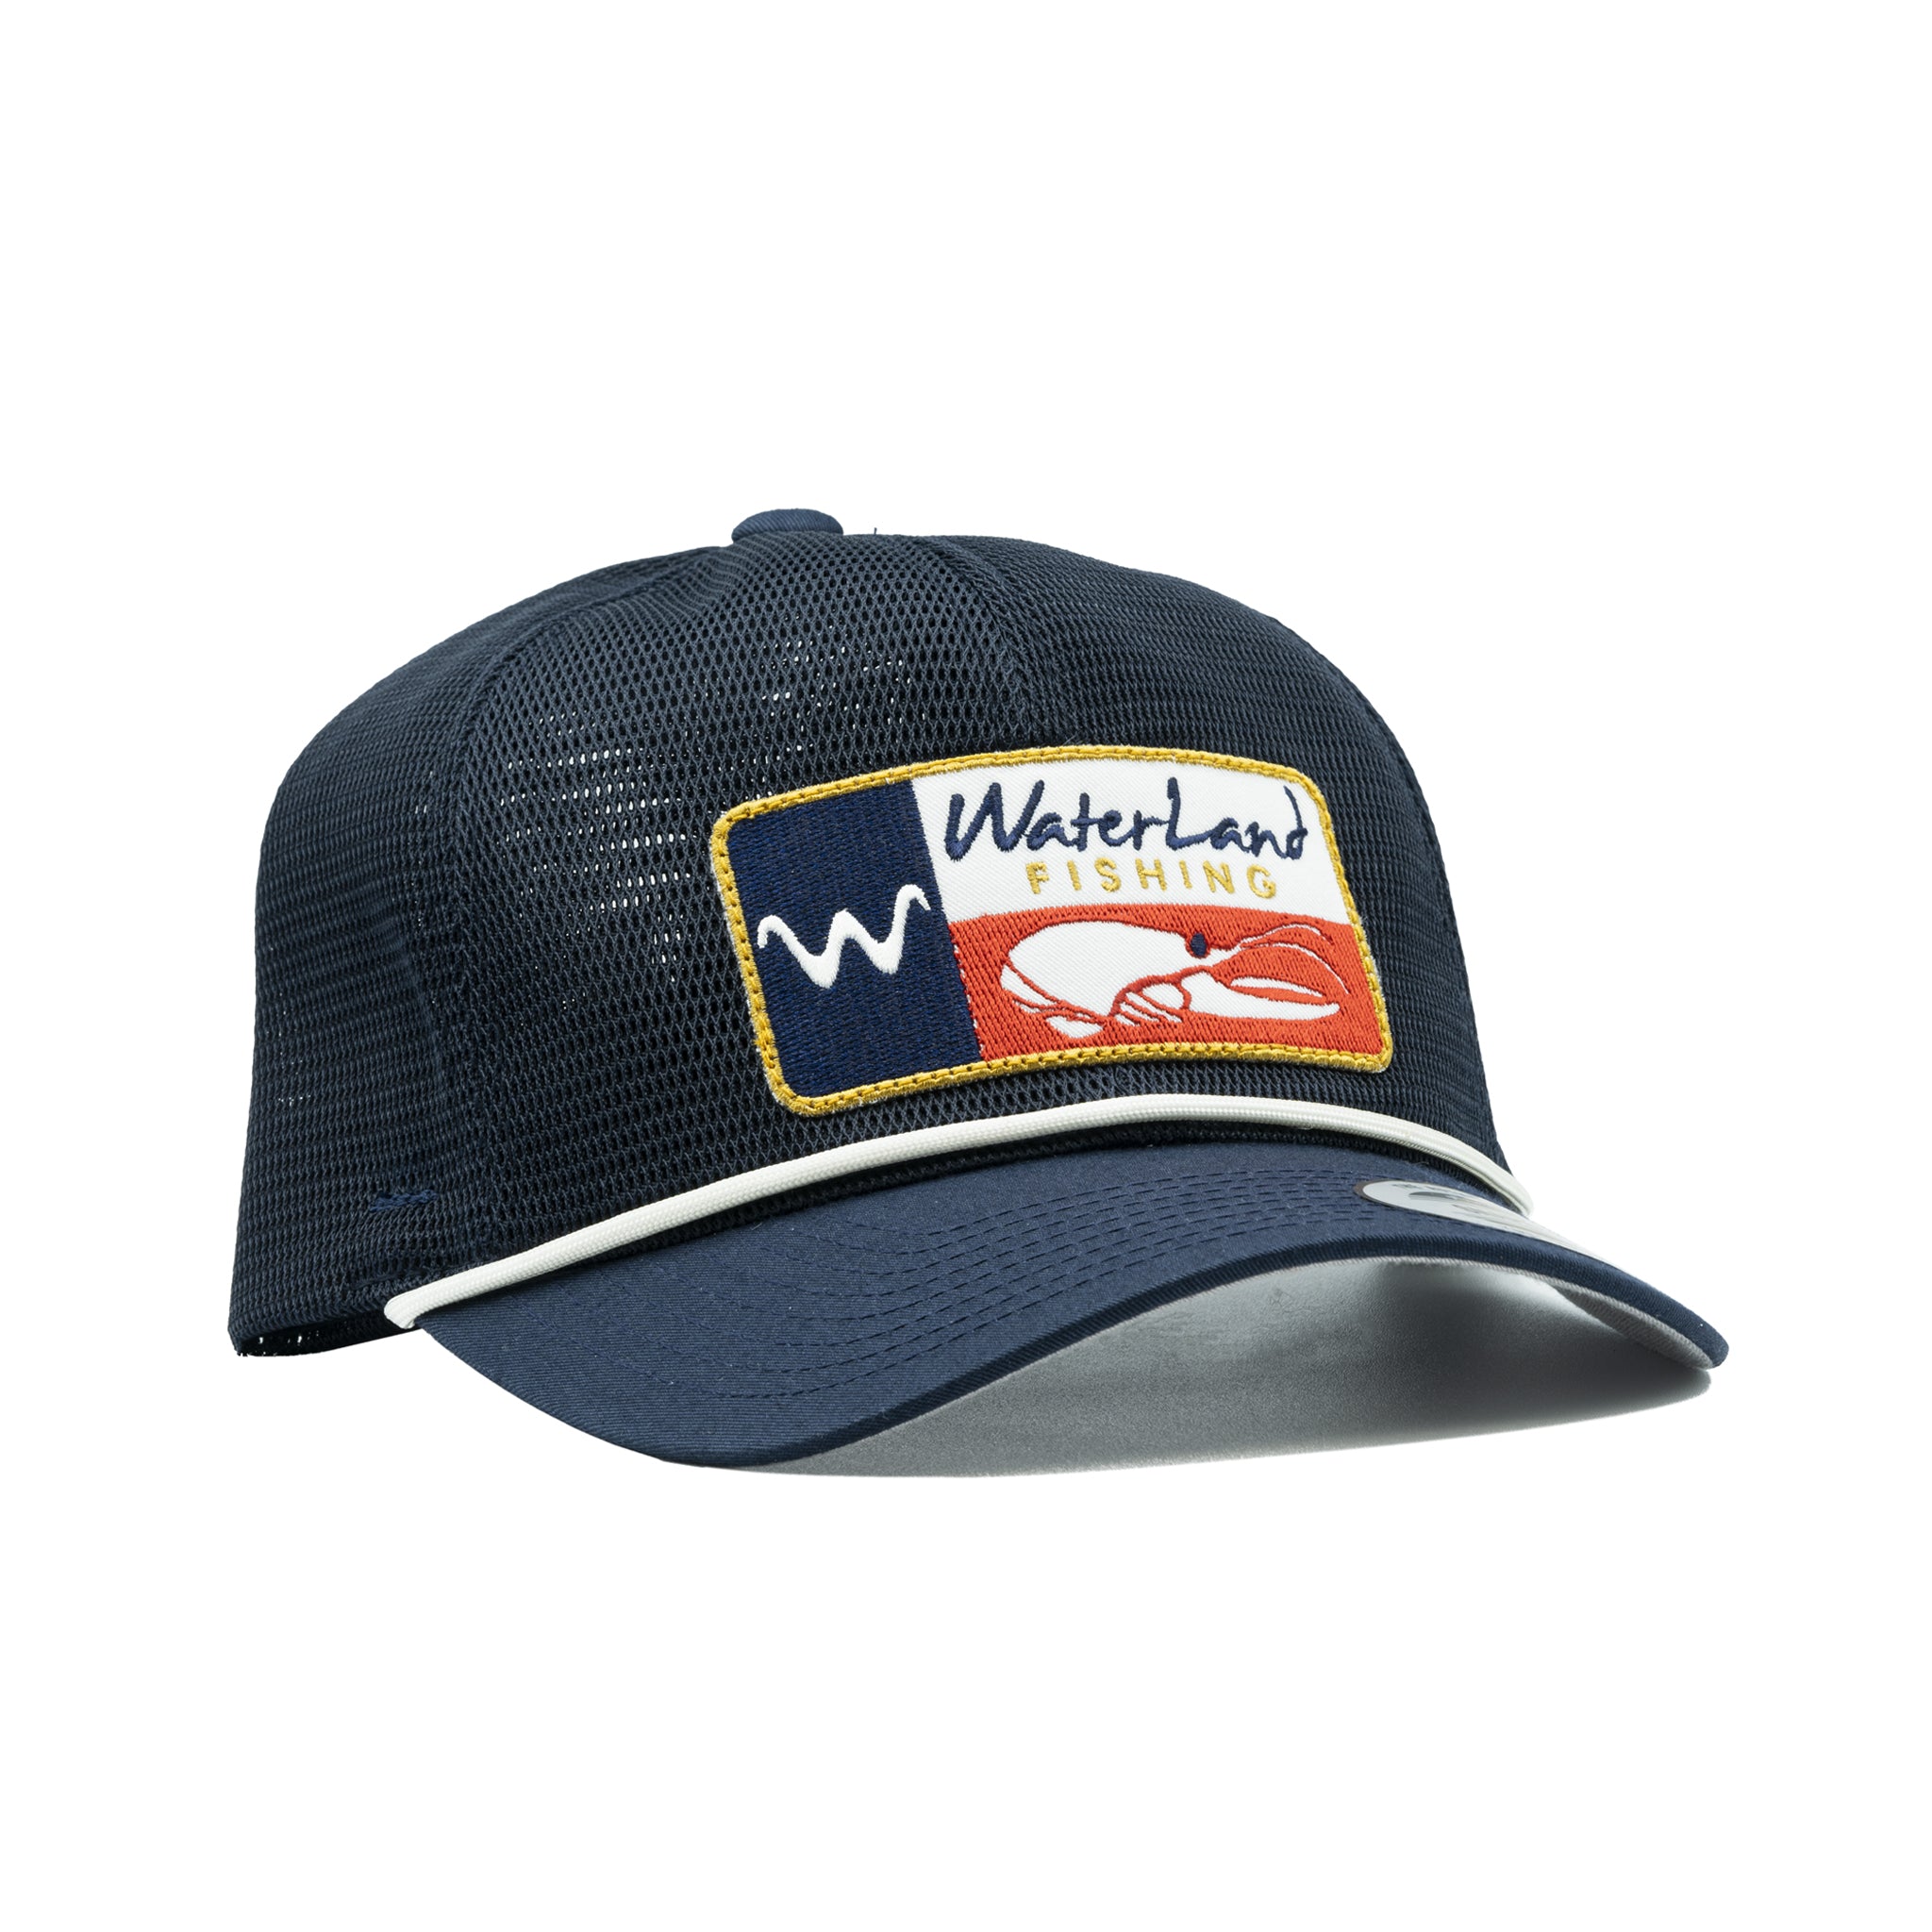 Meshed Up Texas Craw - Rope - Navy